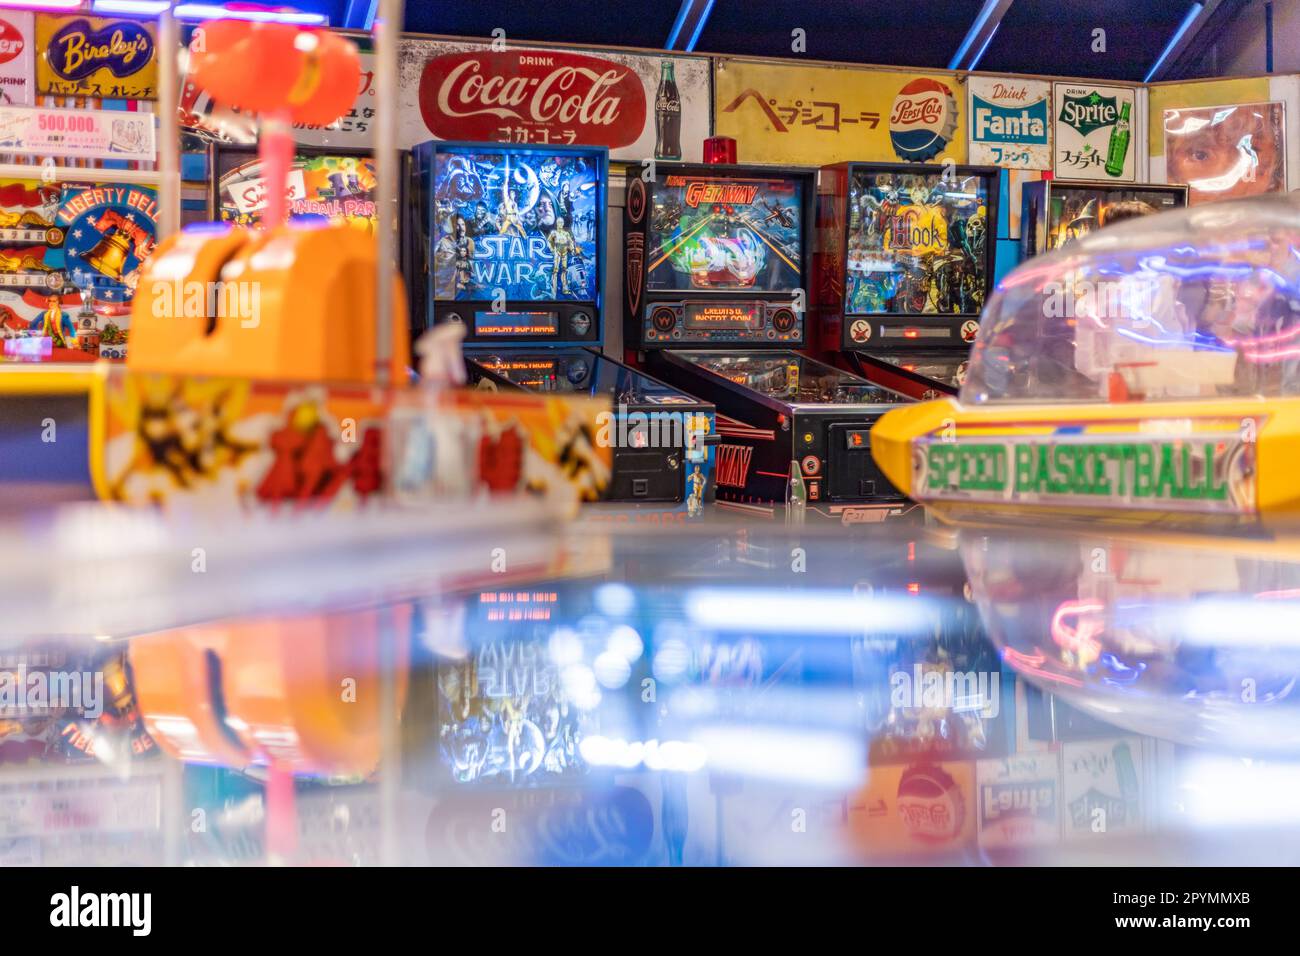 Arcade room in Japan with retro games Stock Photo